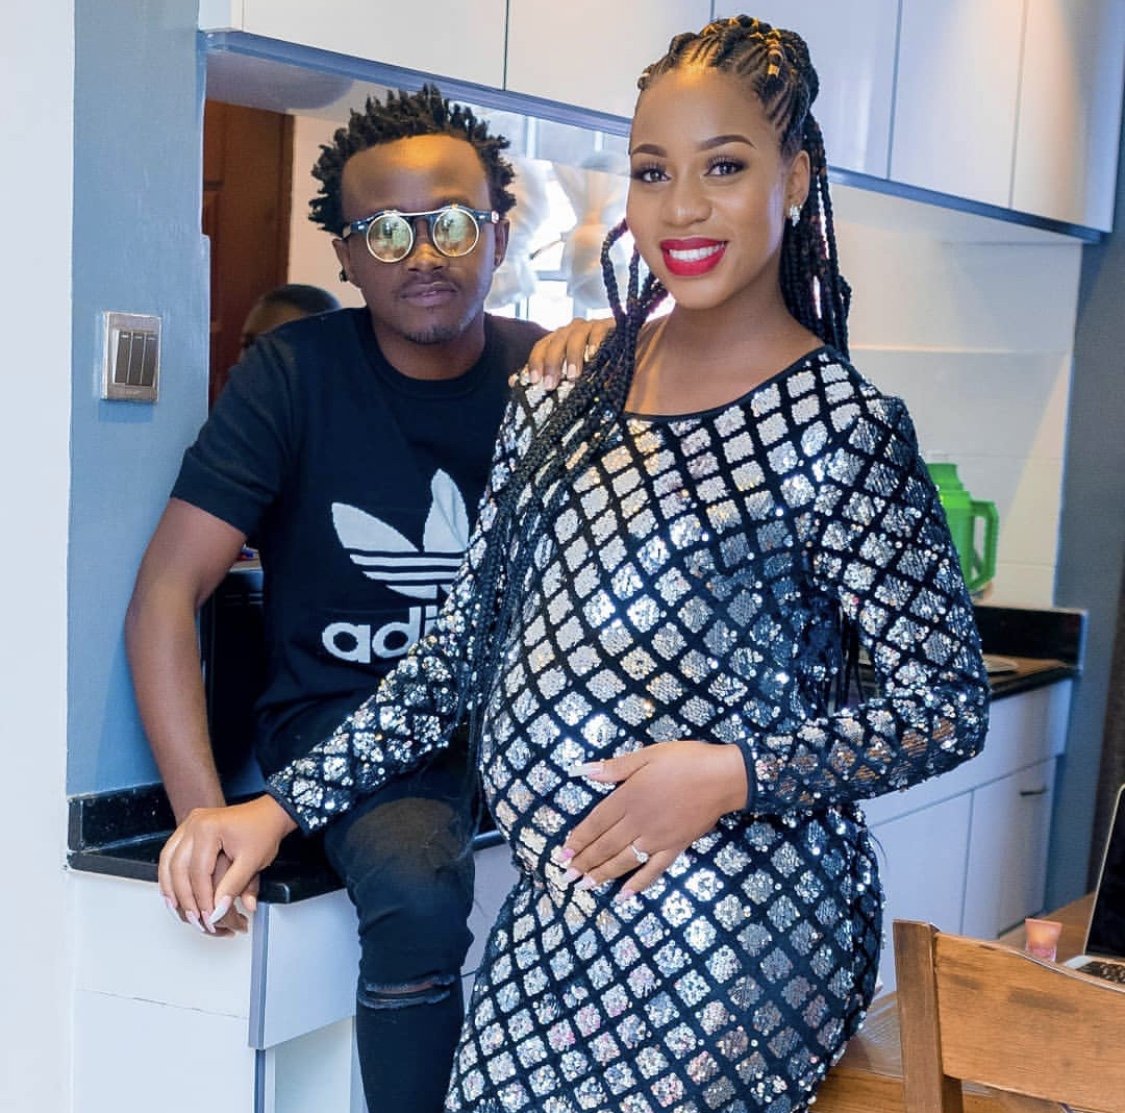 “Wewe ndo ulitaka baby number two!” Diana Marua cries during an argument with her hubby